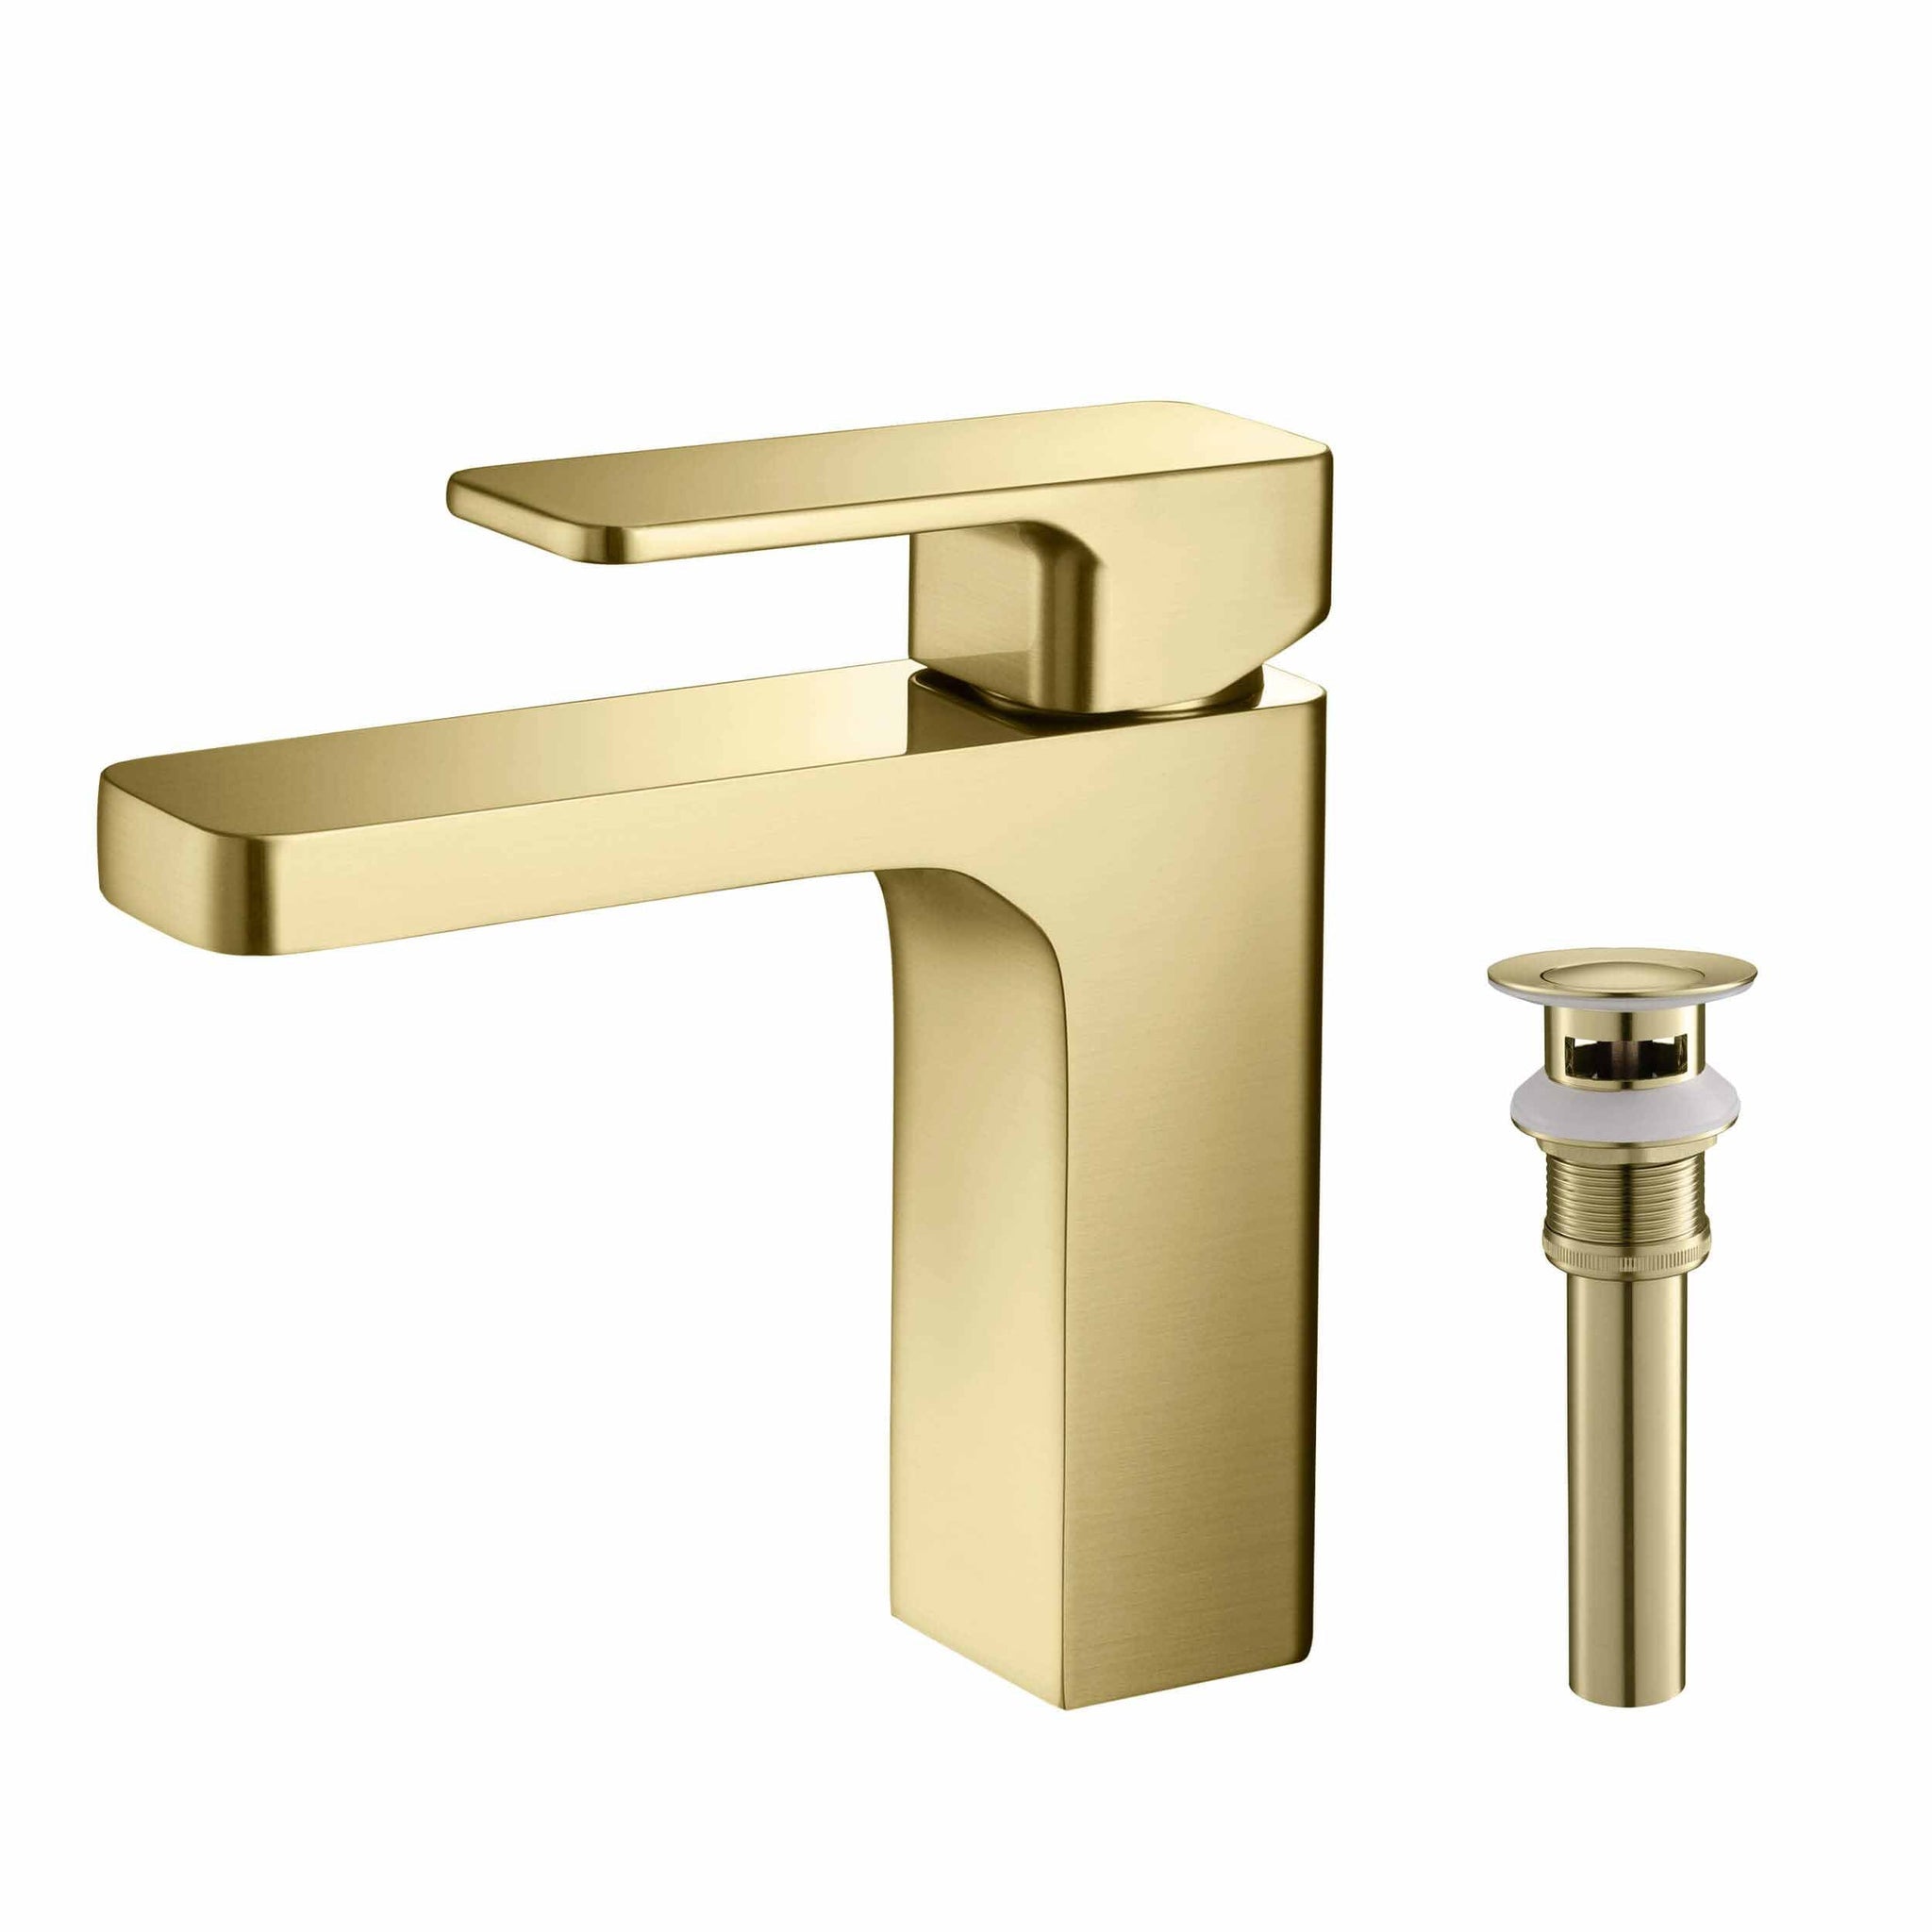 KIBI, KIBI Blaze Single Handle Brushed Gold Solid Brass Bathroom Sink Faucet With Pop-Up Drain Stopper Small Cover With Overflow